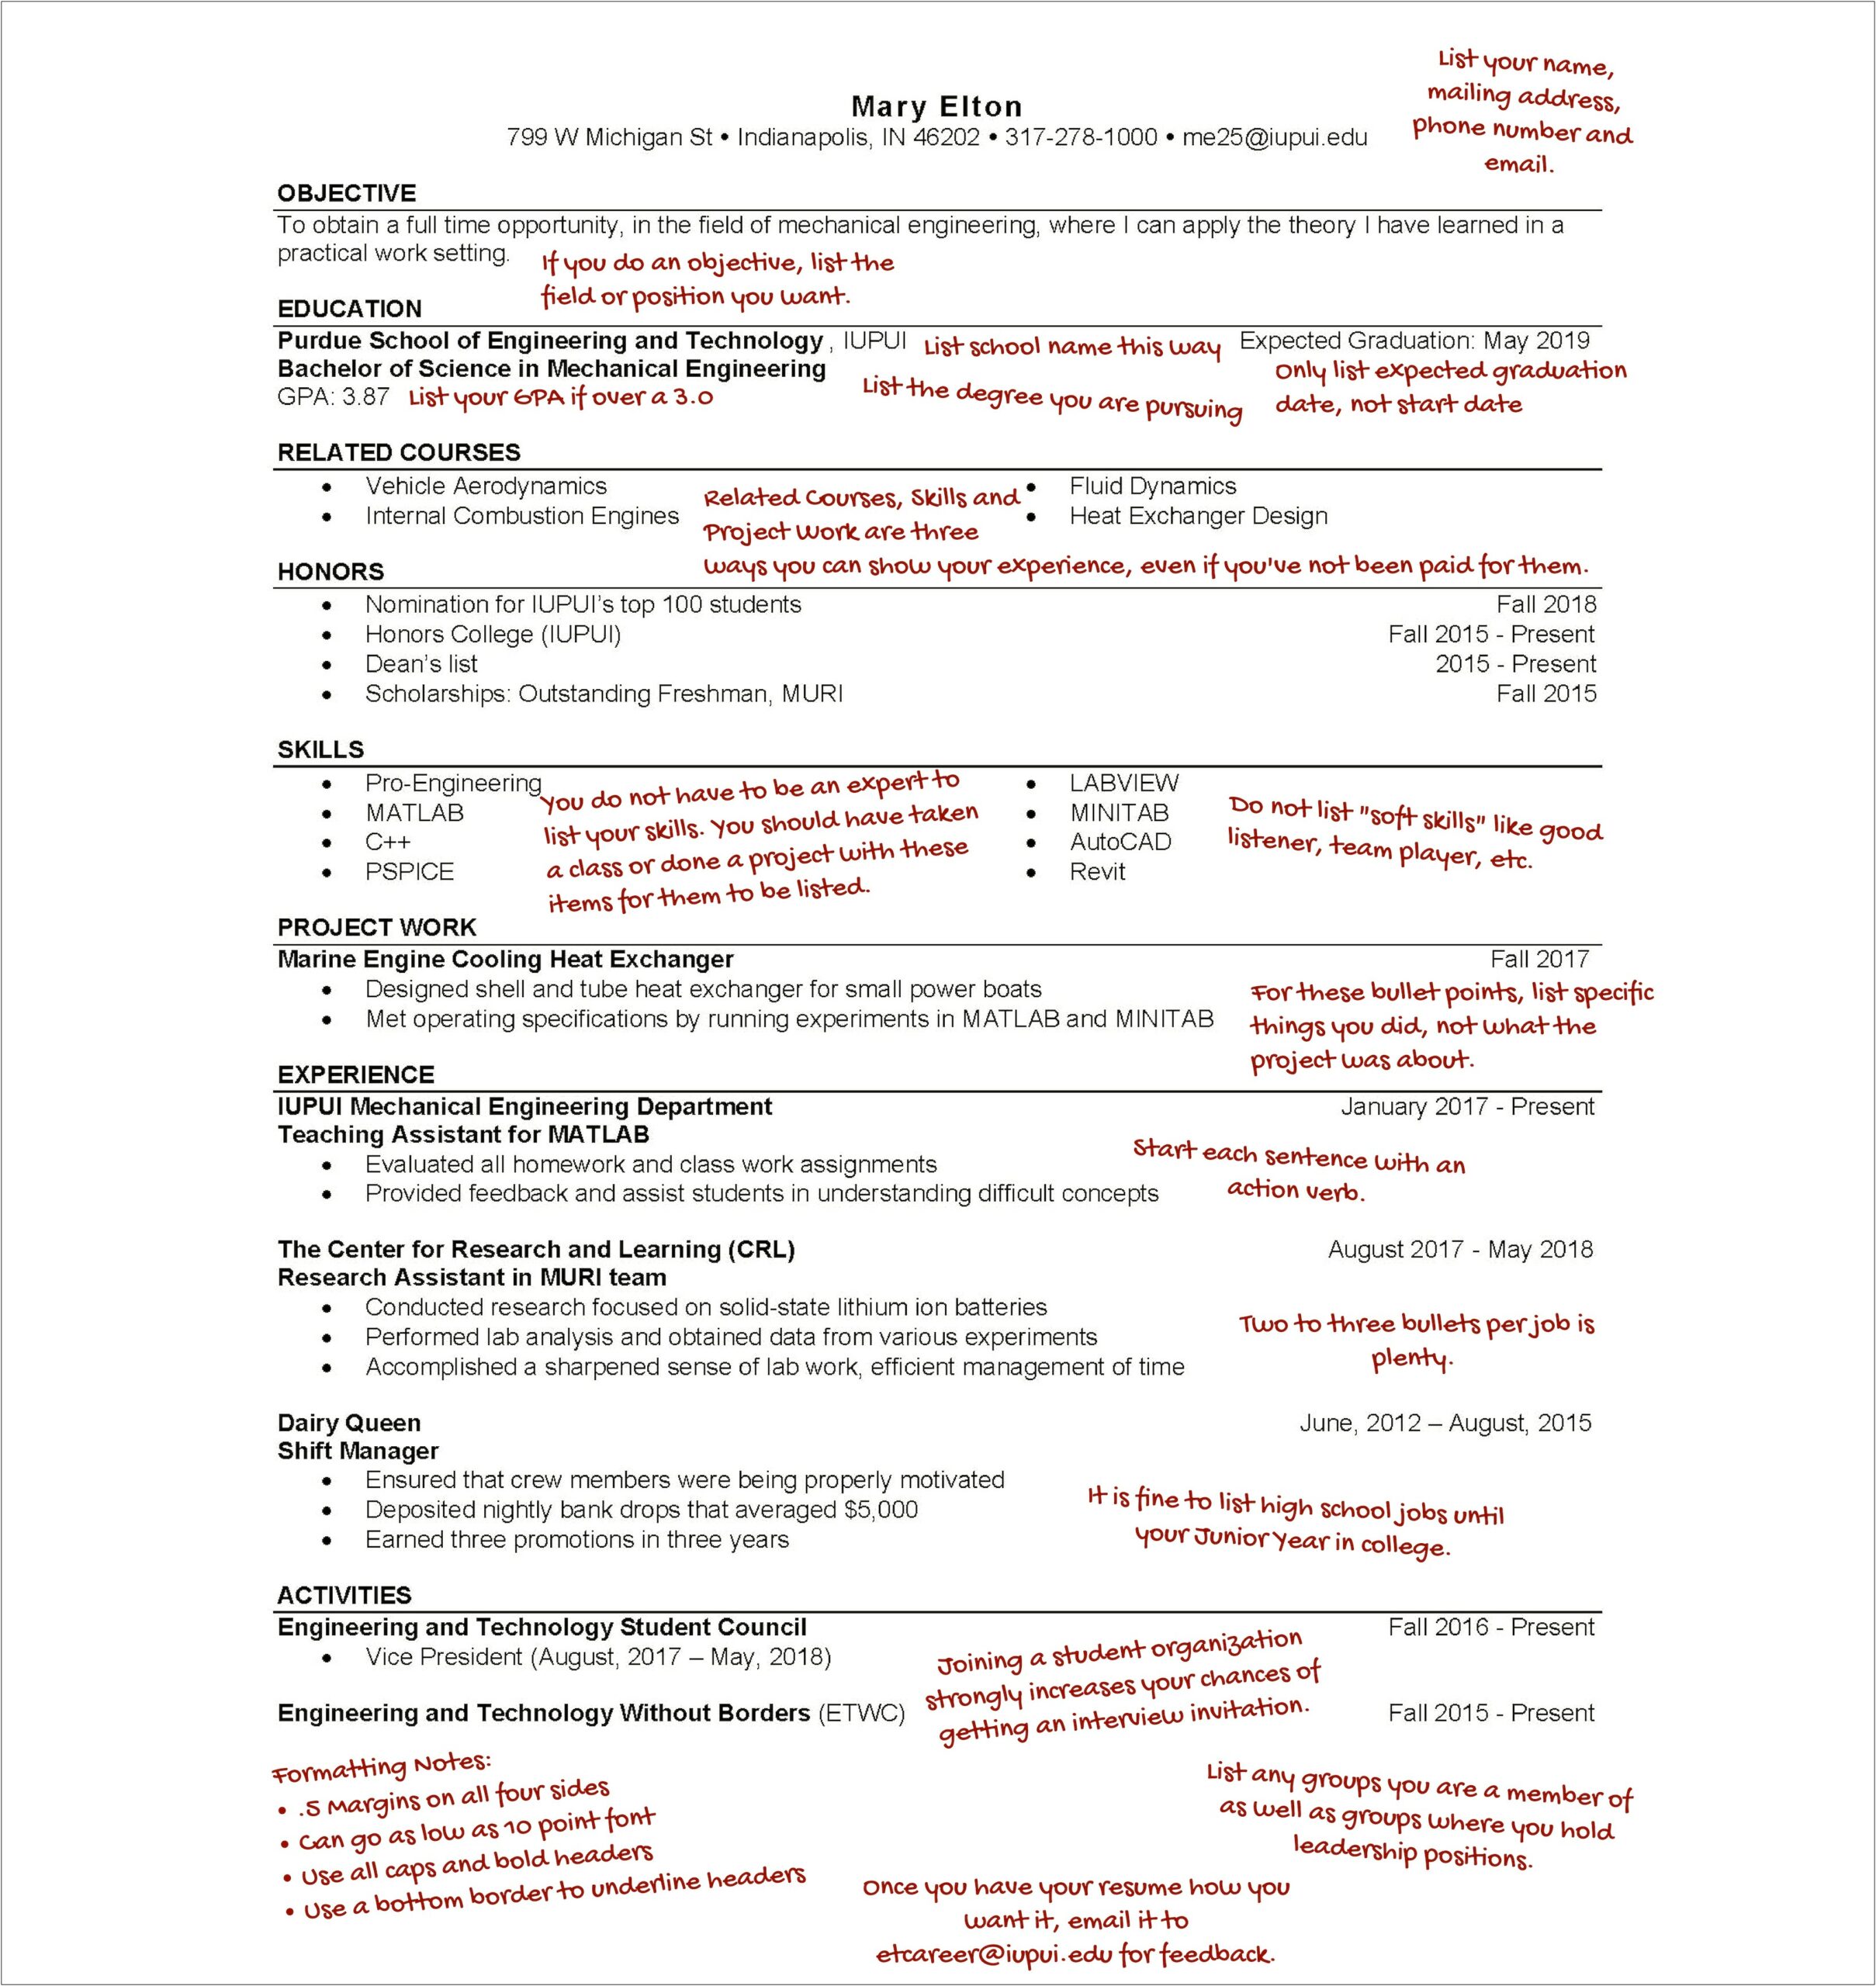 Good Response To Employer With Resume